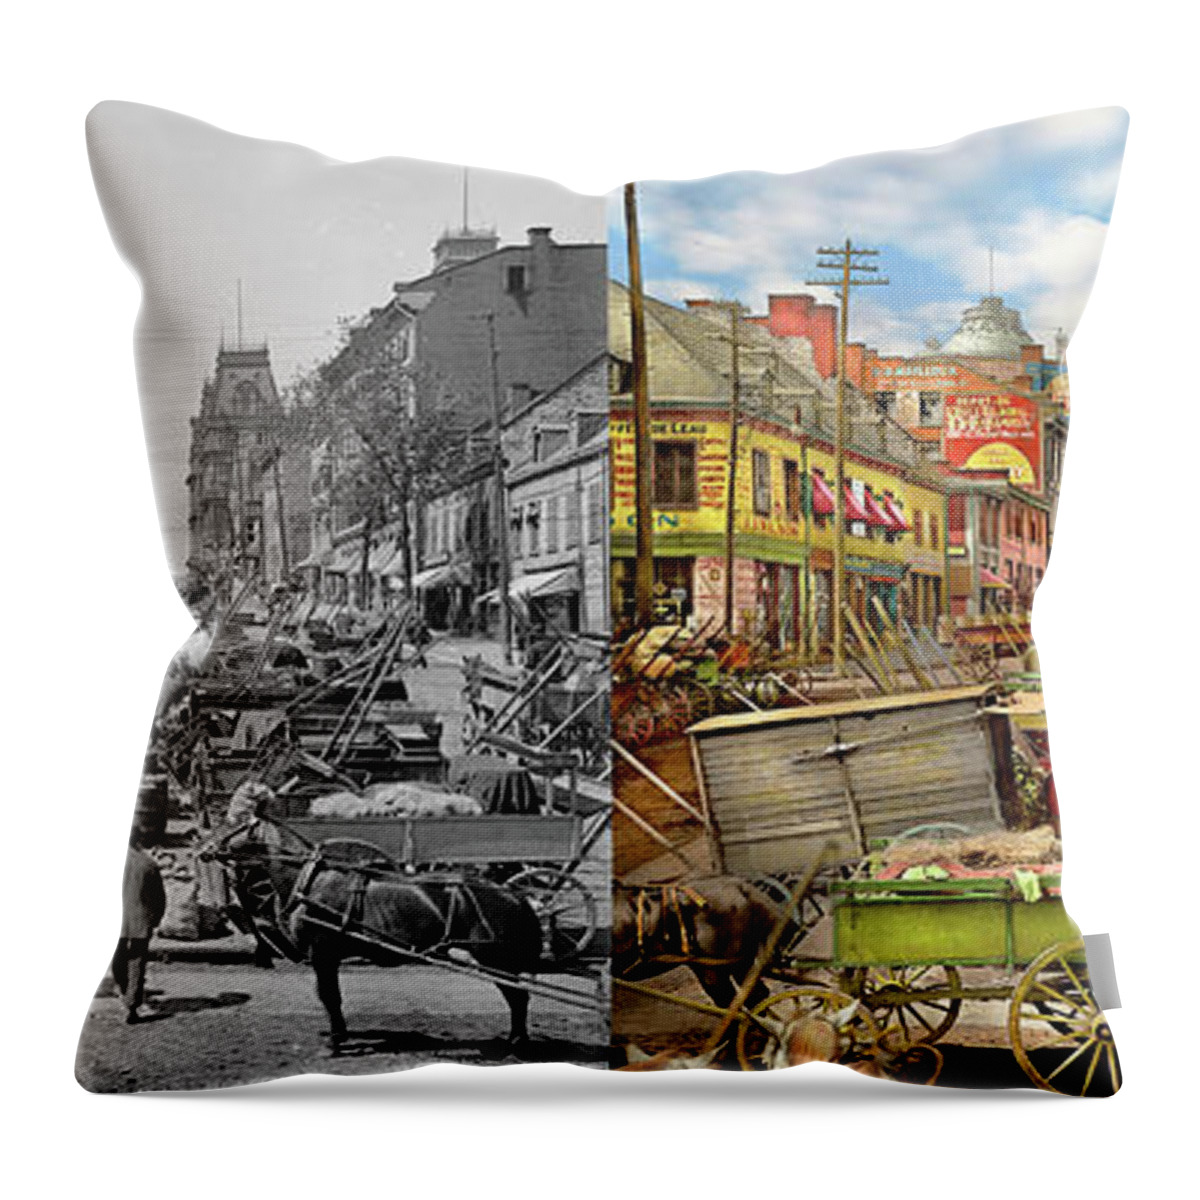 Jacques Cartier Square Throw Pillow featuring the photograph City - Montreal, CA - Jacques Cartier Square 1900 - Side by Side by Mike Savad